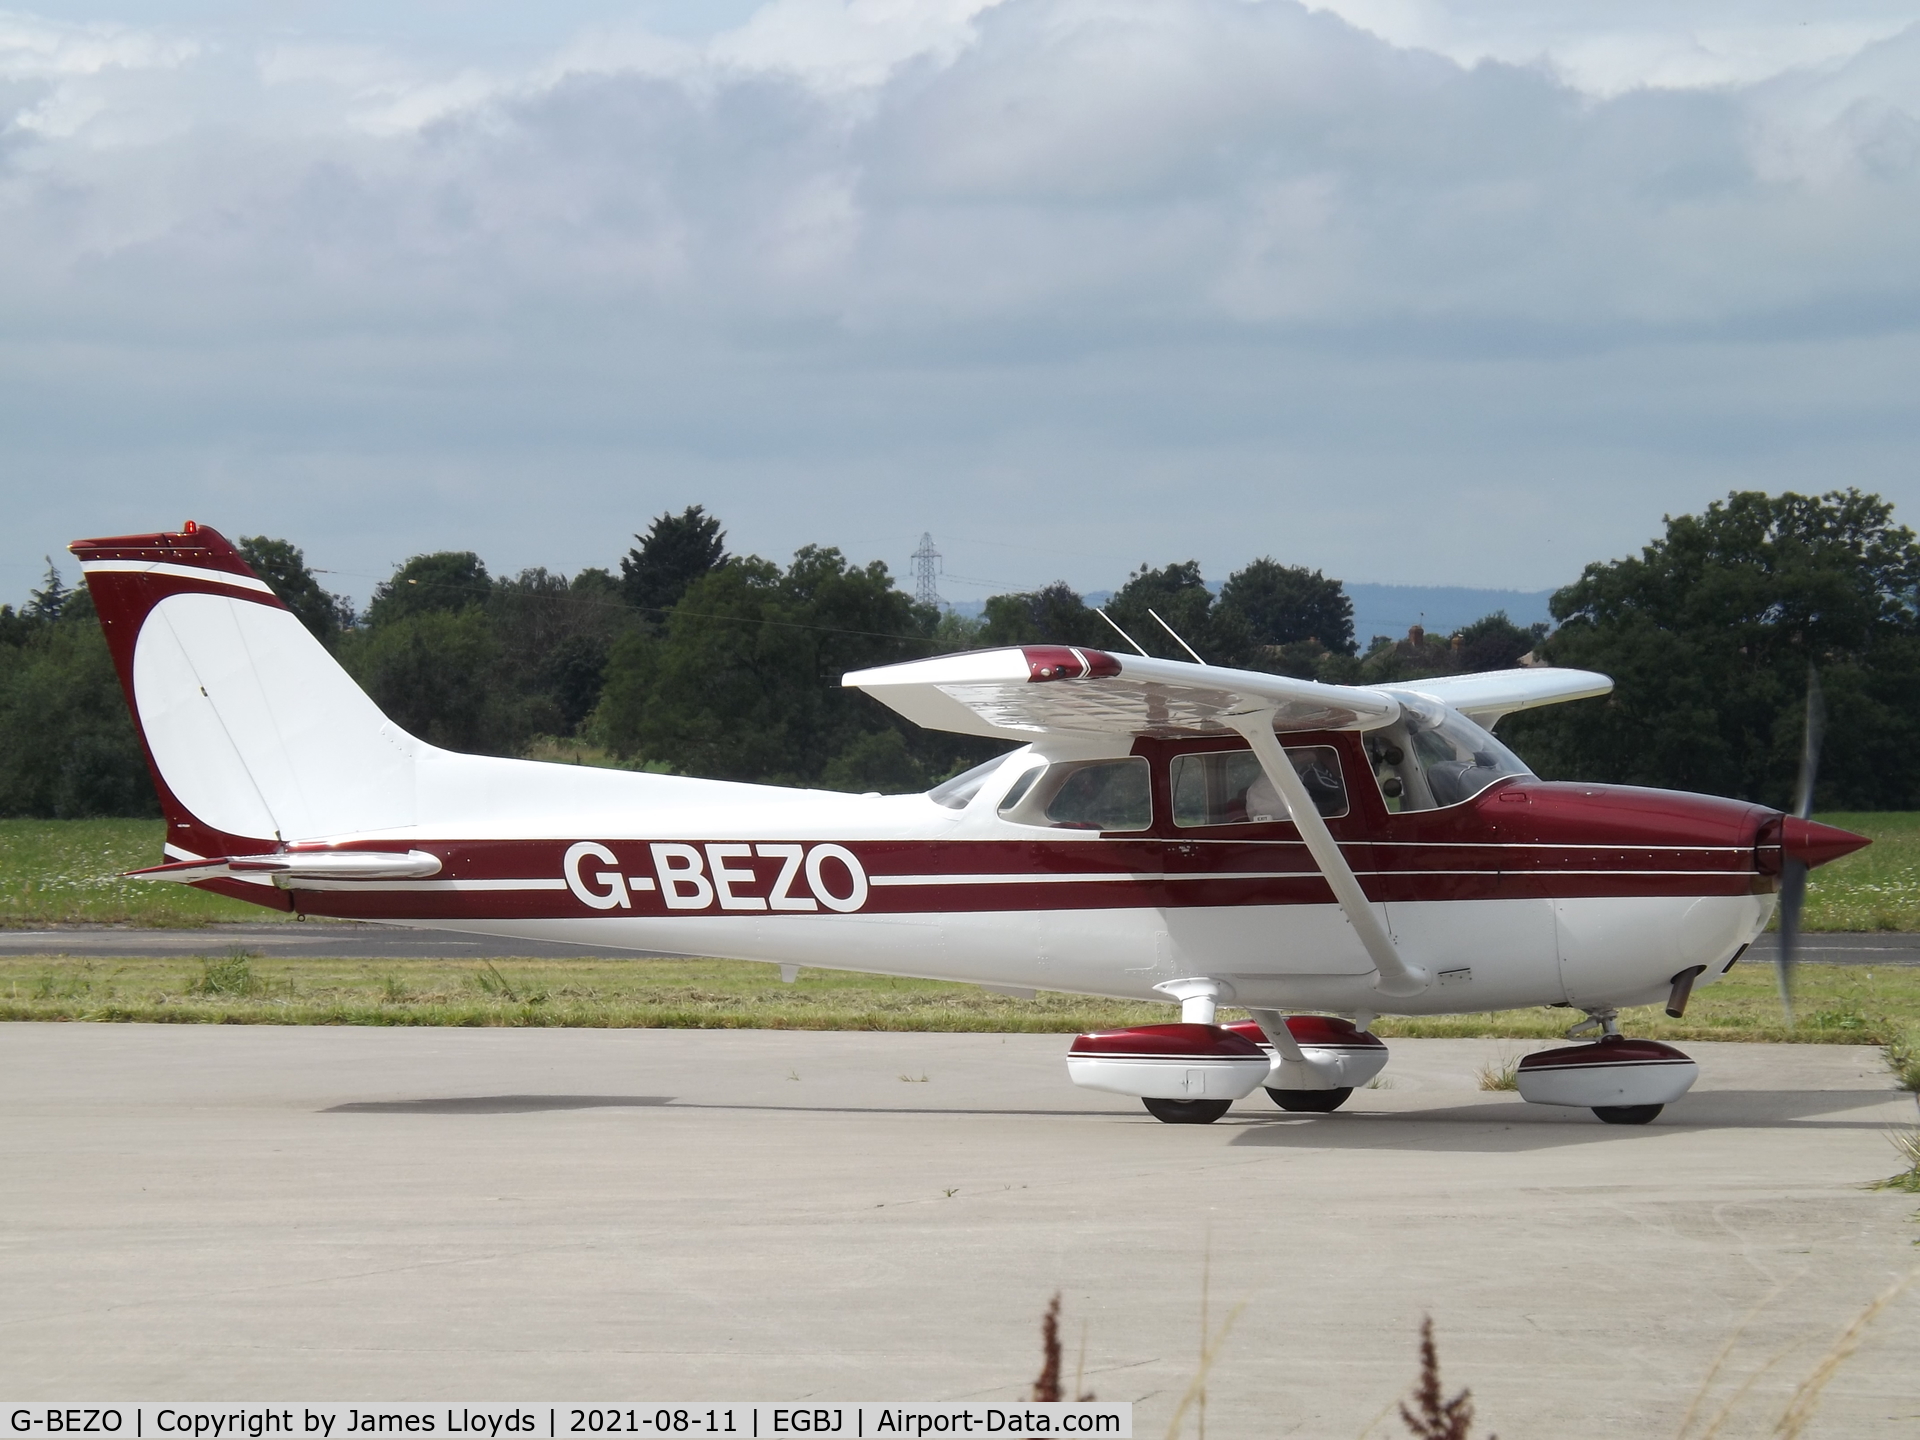 G-BEZO, 1976 Reims F172M ll Skyhawk C/N 1392, Seen with a new paint job at Gloucestershire Airport.